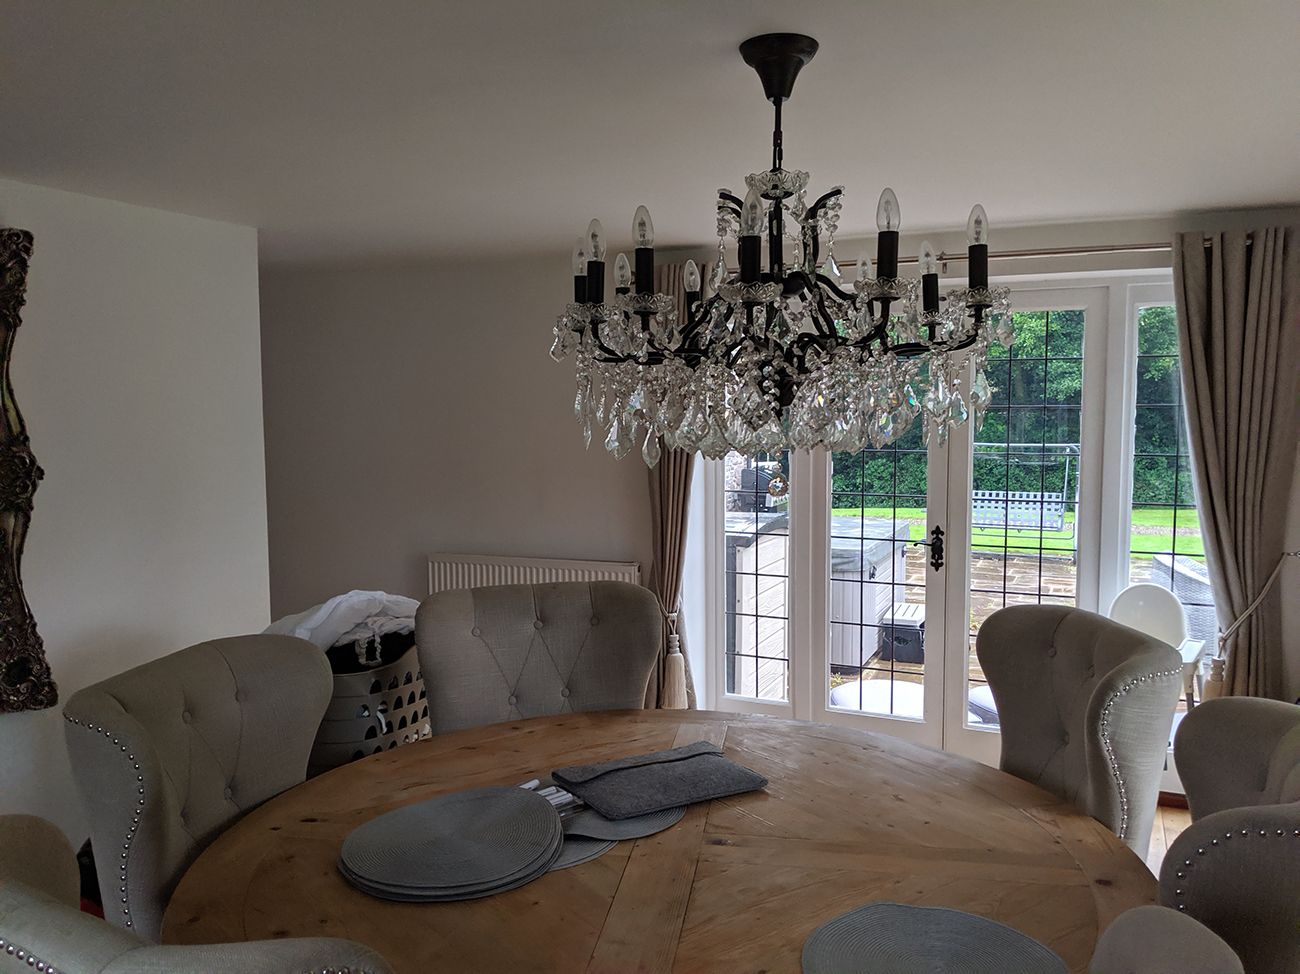 The before photo shows the same view with a dining table and large grey chairs.